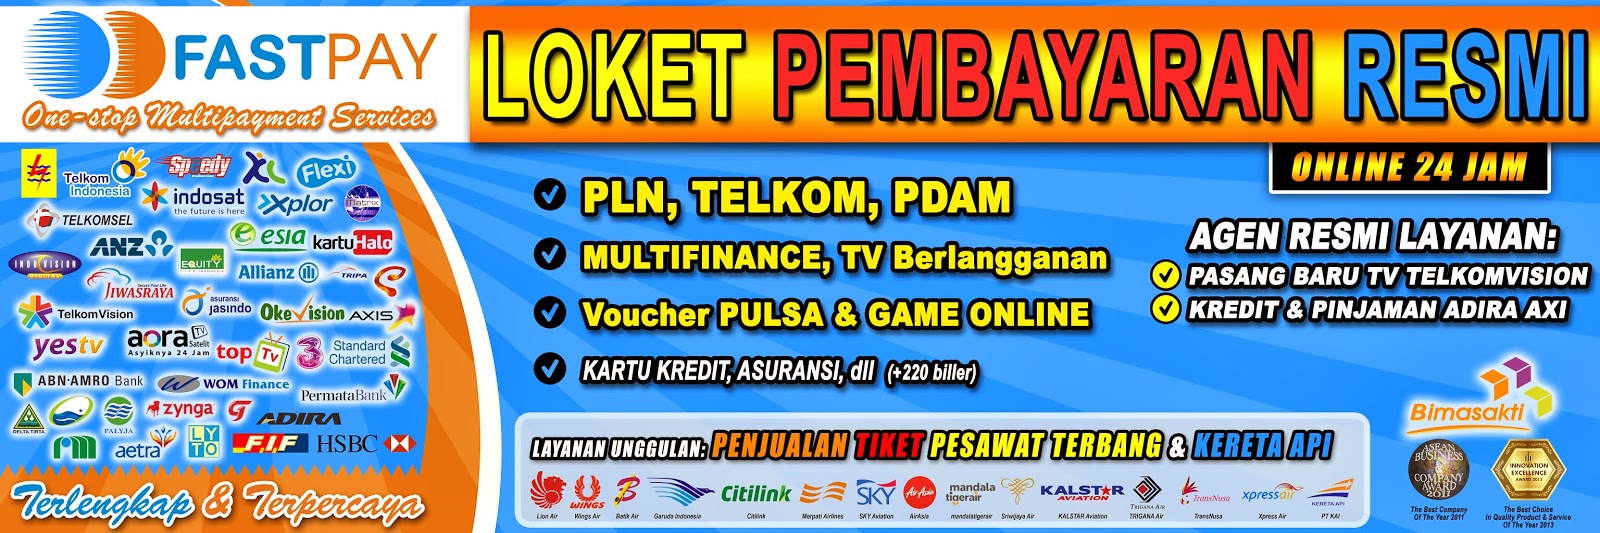 Layanan Pdam Fastpay